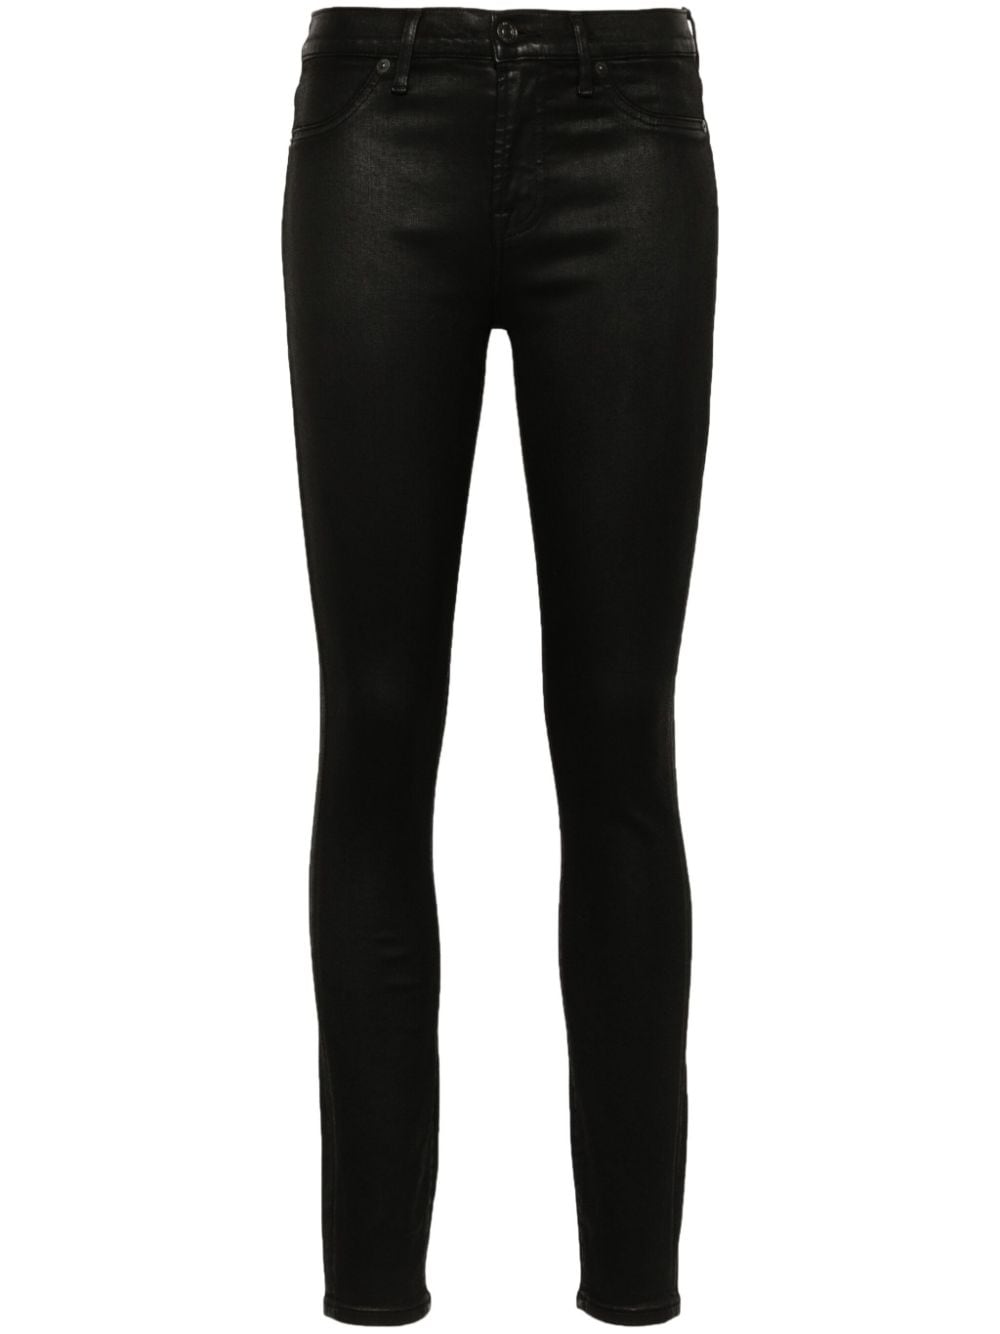 7 For All Mankind mid-rise skinny jeans - Black von 7 For All Mankind